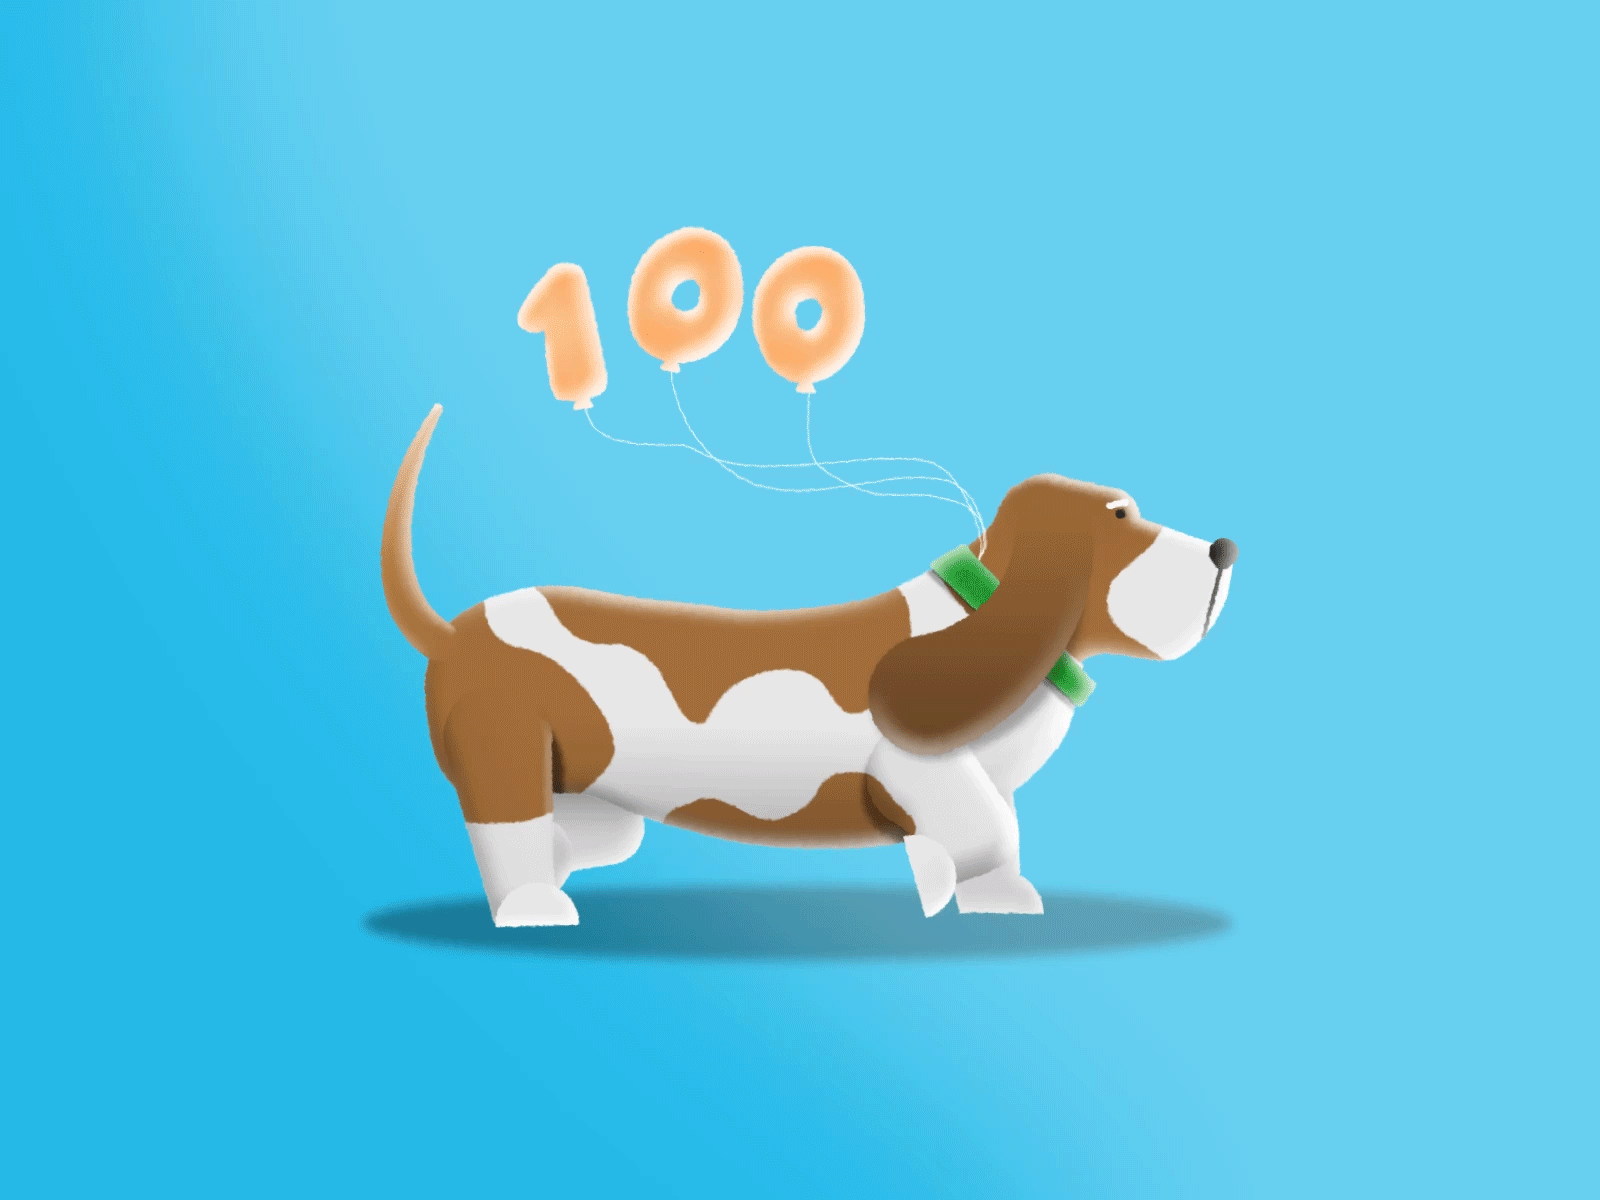 Basset hound walk cycle achieved after effects animation basset basset dog basset hound basset hound walk basset walk cycle belgium celebration character animation dog dog walk cycle followers motion design walk cycle